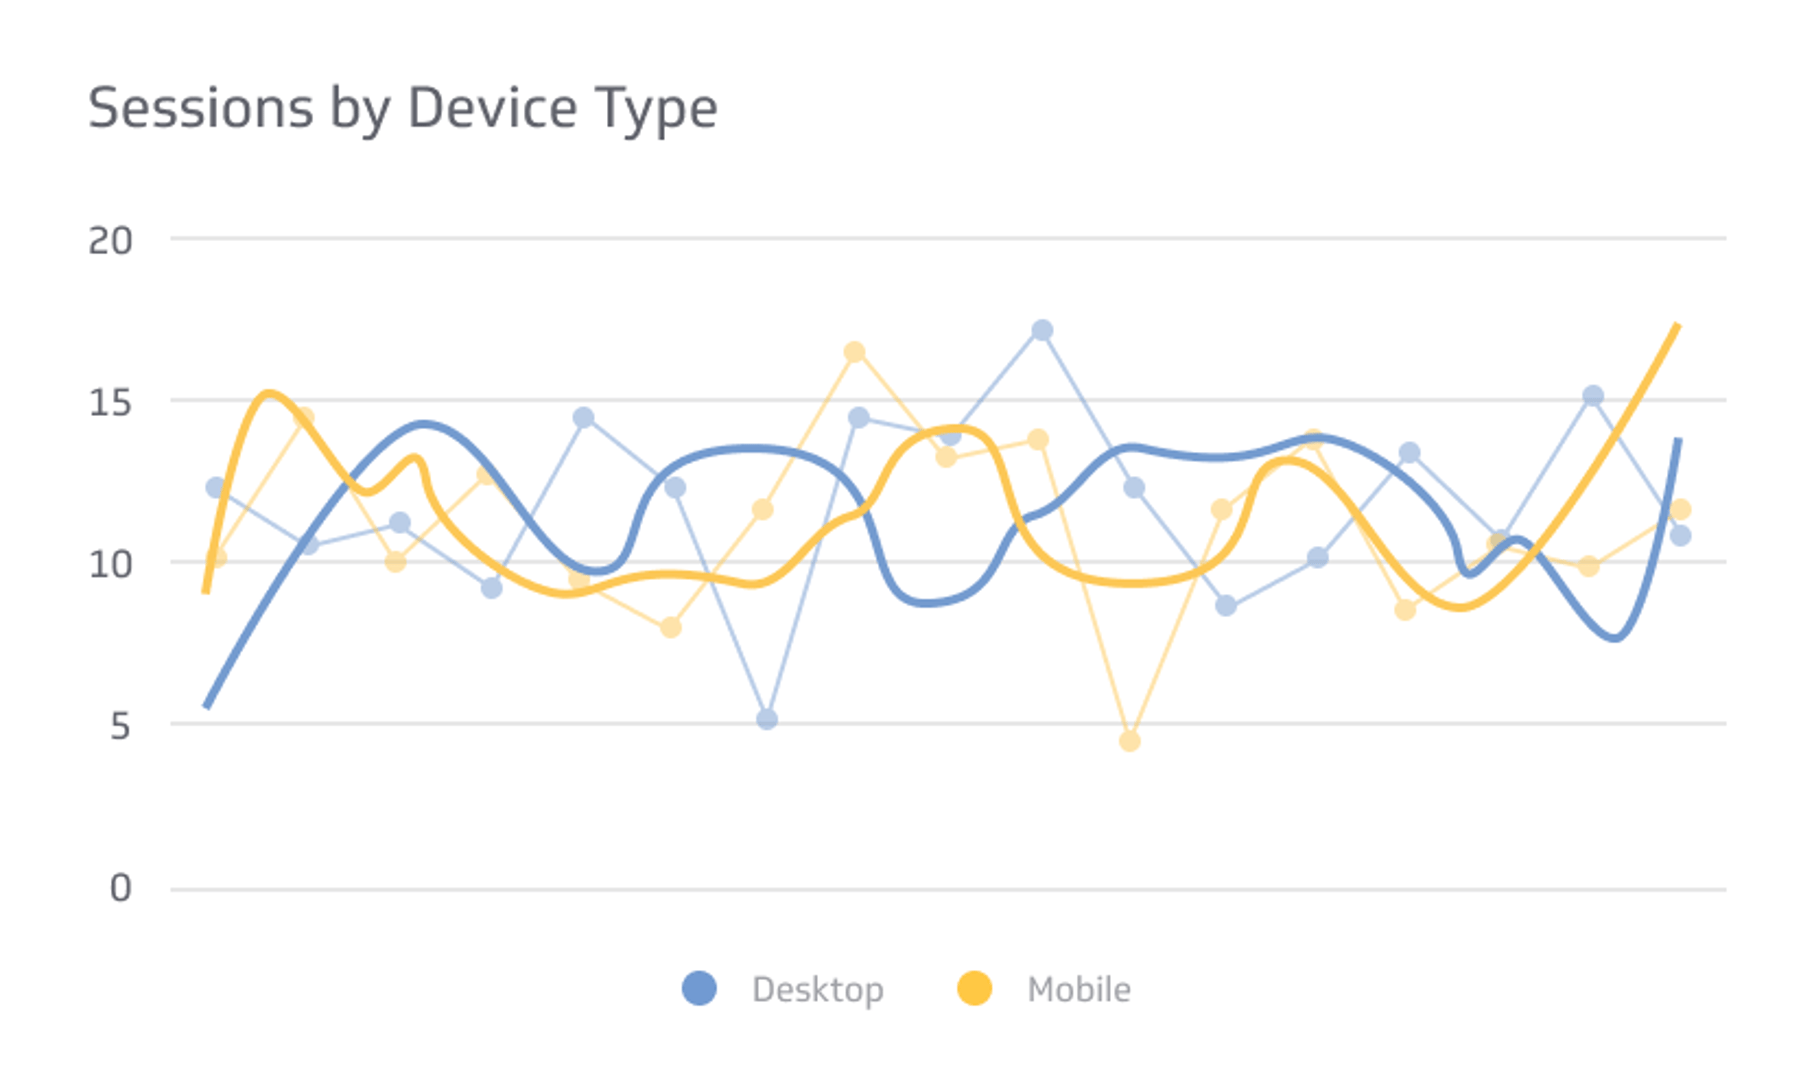 Related KPI Examples - Sessions by Device Type Metric